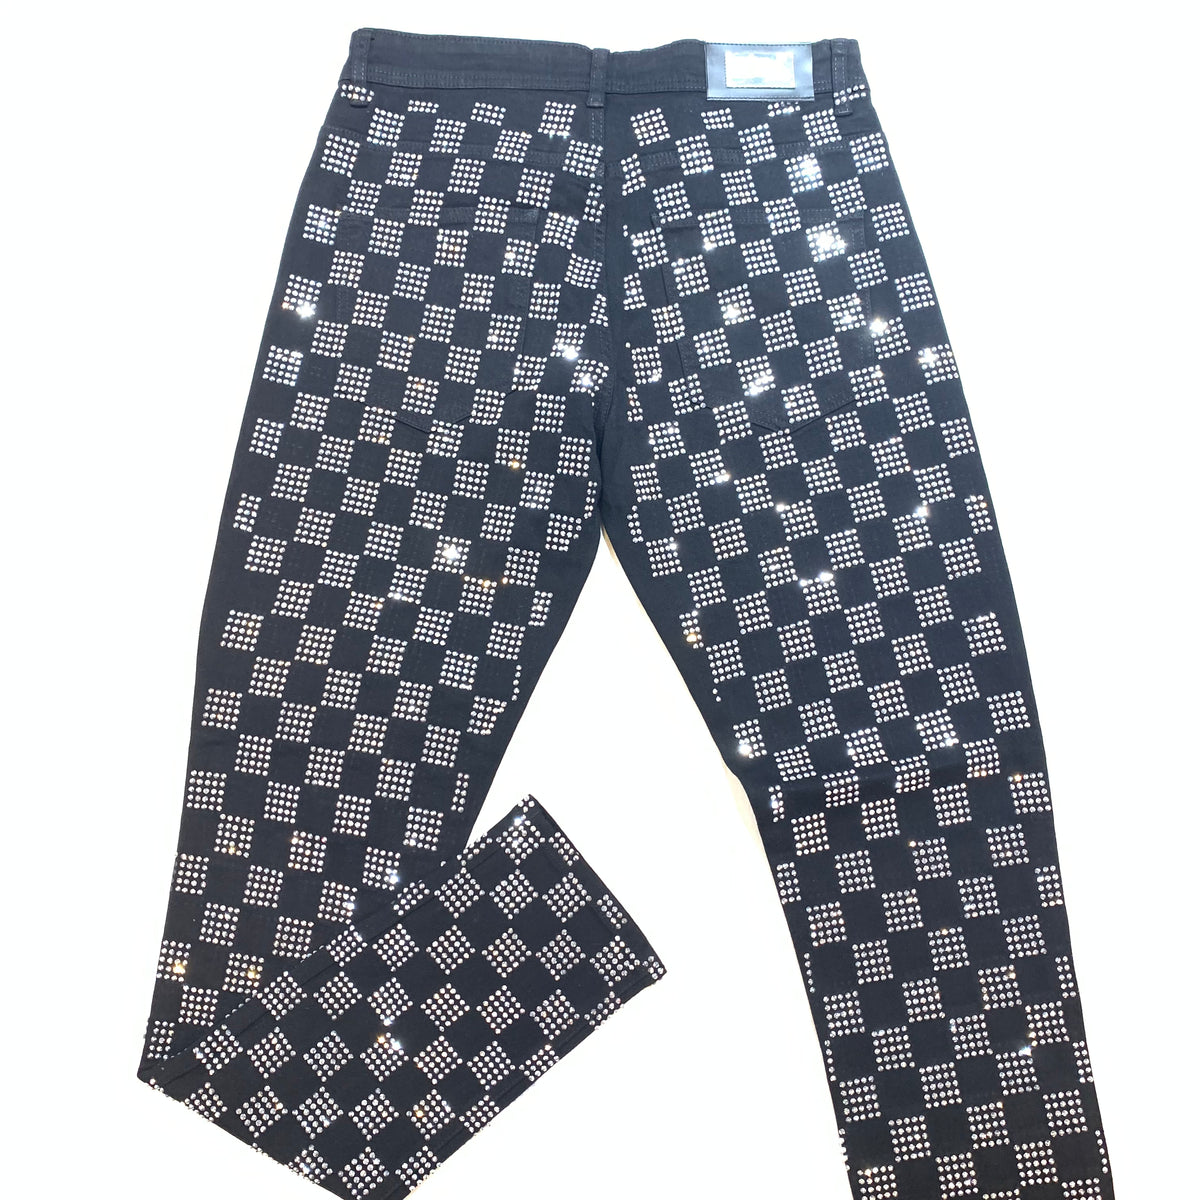 Barocco Black Silver Full Crystal Pants - Dudes Boutique